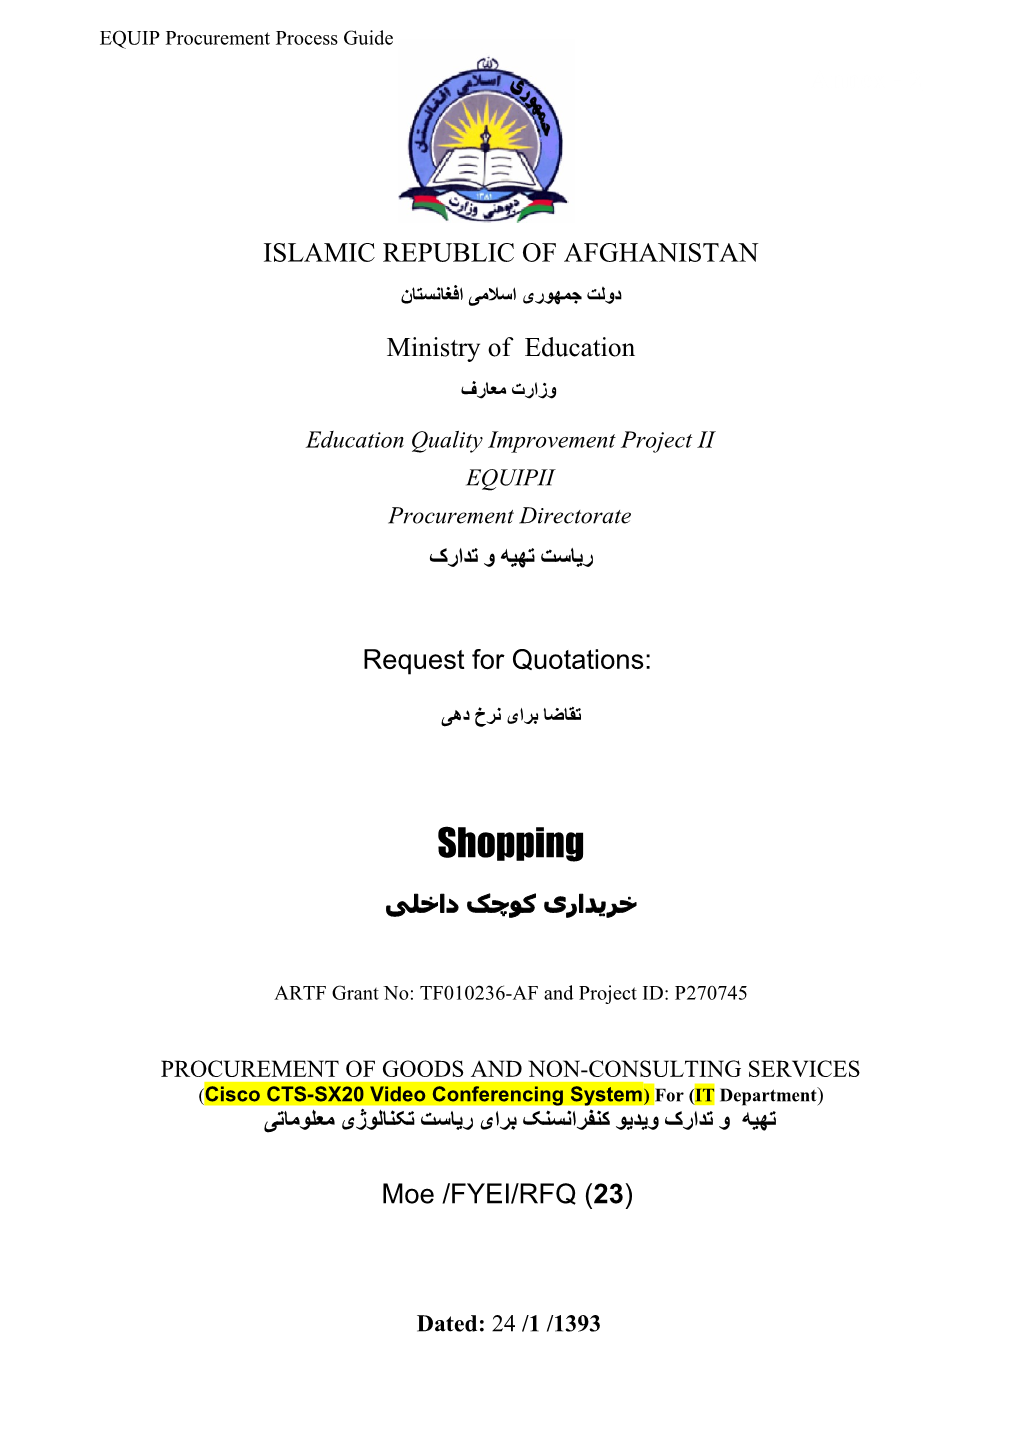 National Shopping - Invitation to Quote (ITQ)